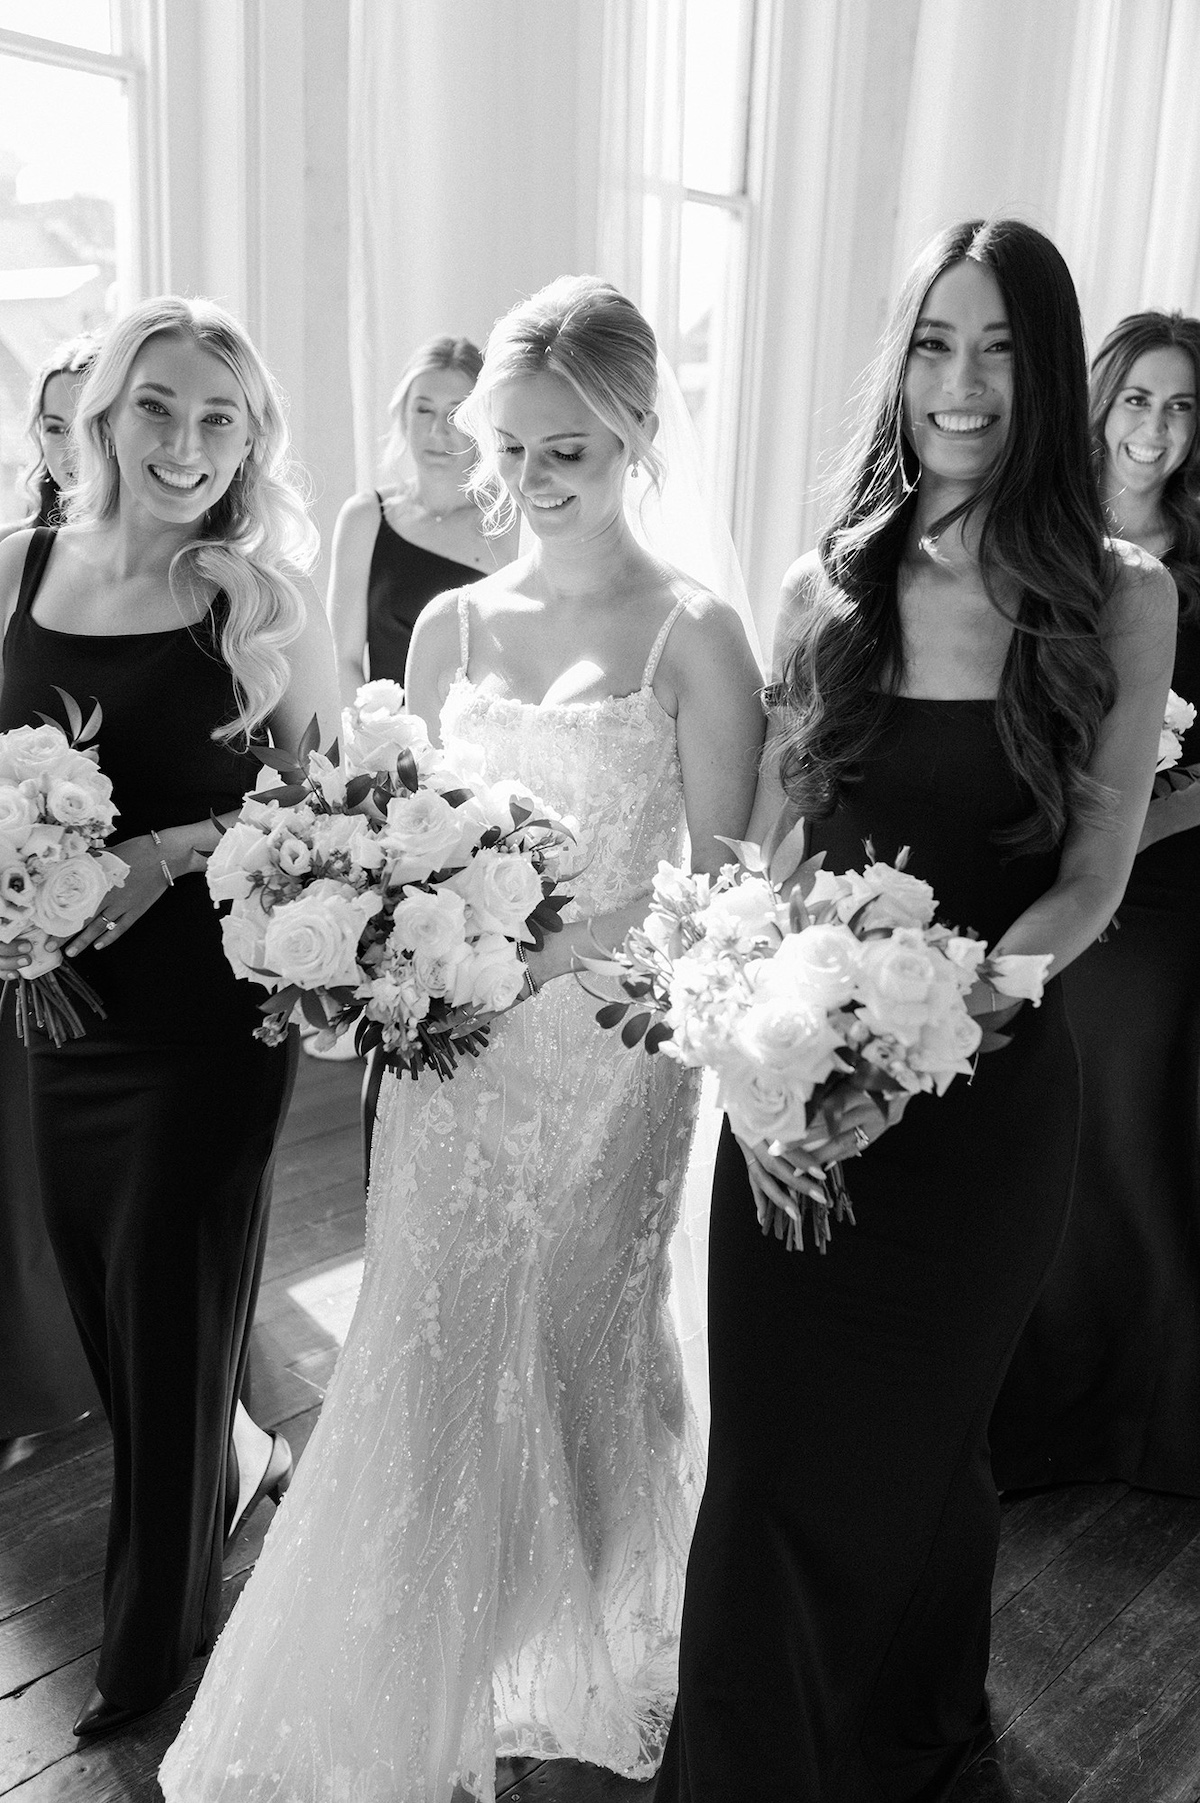 Candid editorial shot capturing the joyous camaraderie of bridesmaids, radiating sophistication in every moment.